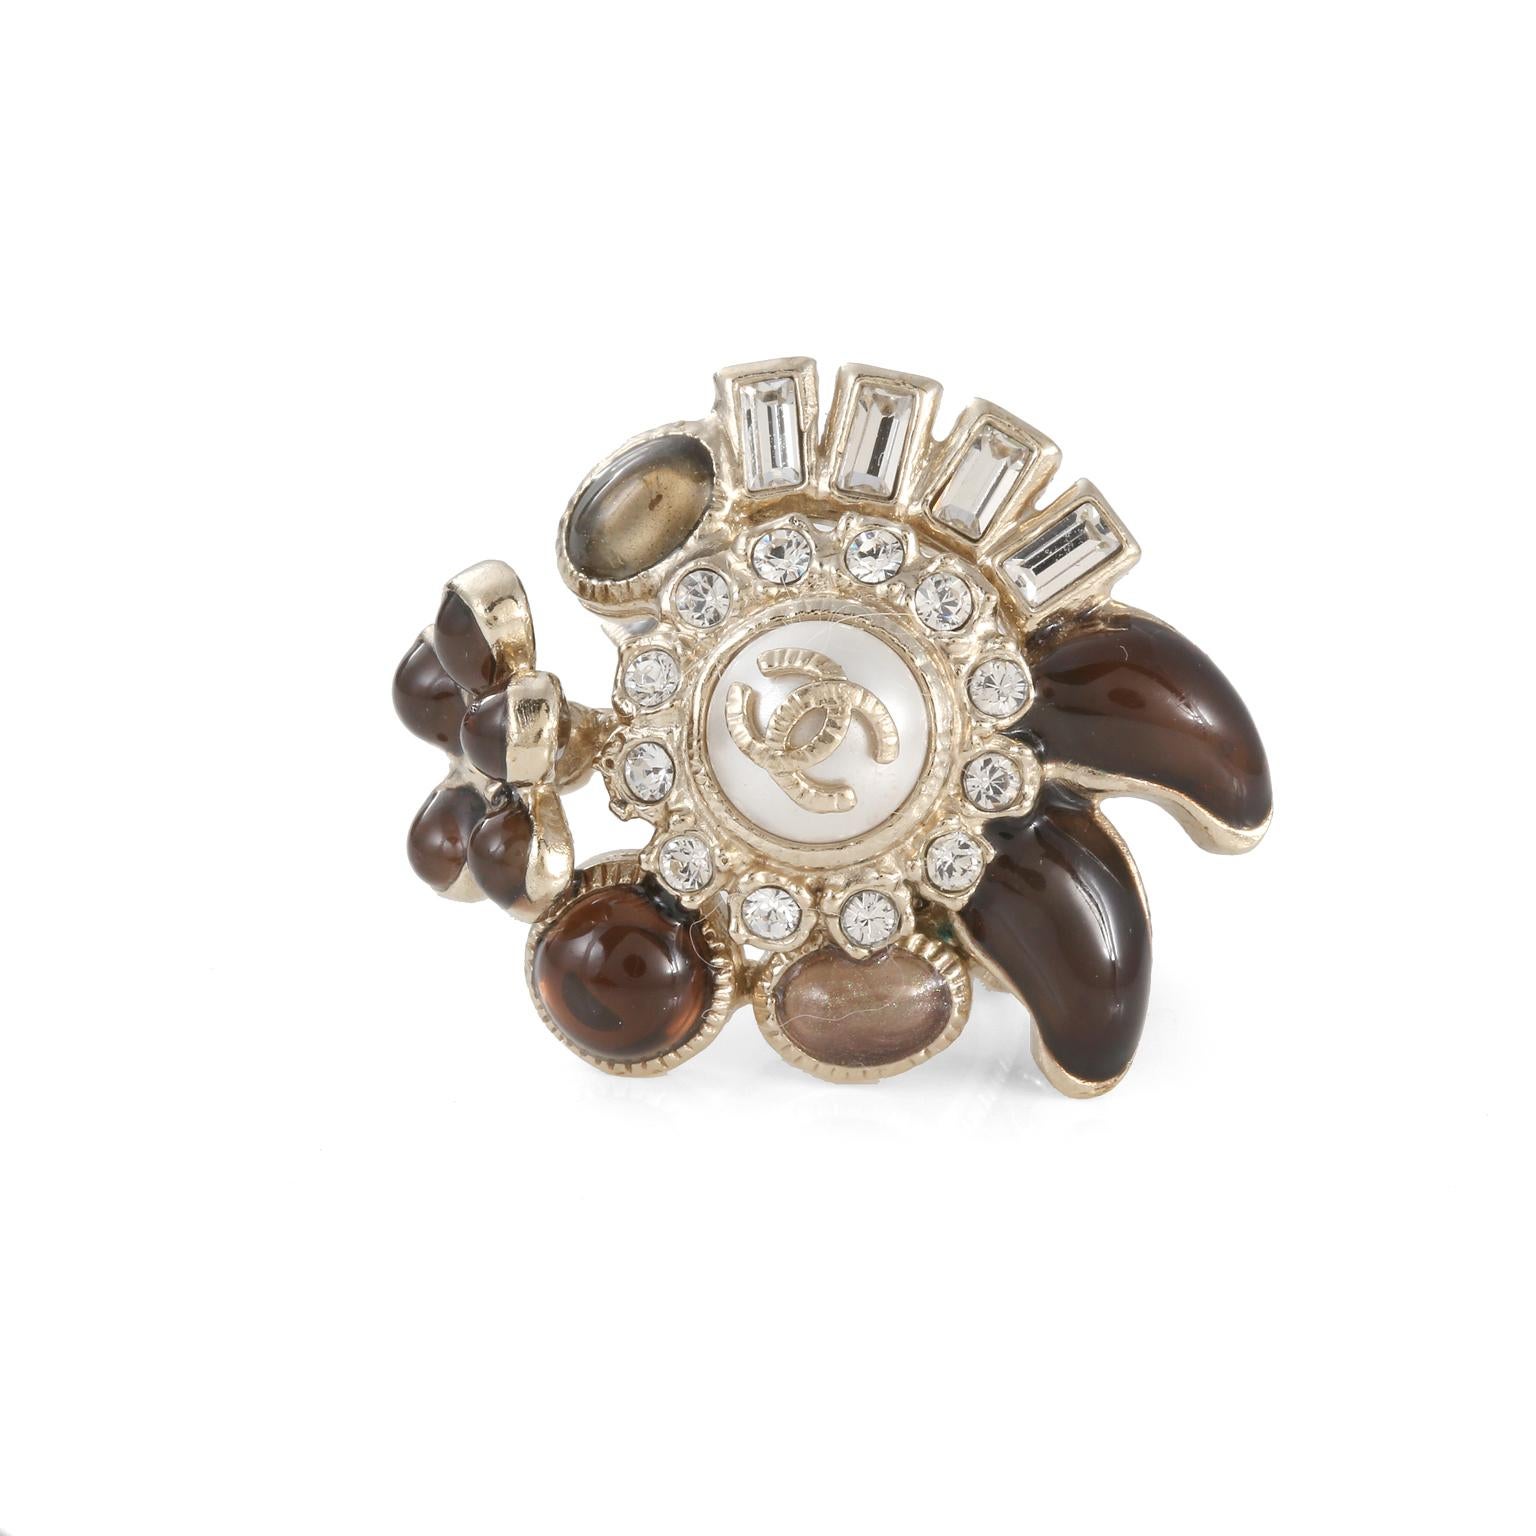 This authentic Chanel Flower Ring is in excellent condition.  Faux pearl center surrounded by crystals and glass stones in shades of neutral brown. Light gold tone finish with enamel.  Size 6. Pouch or box included.
